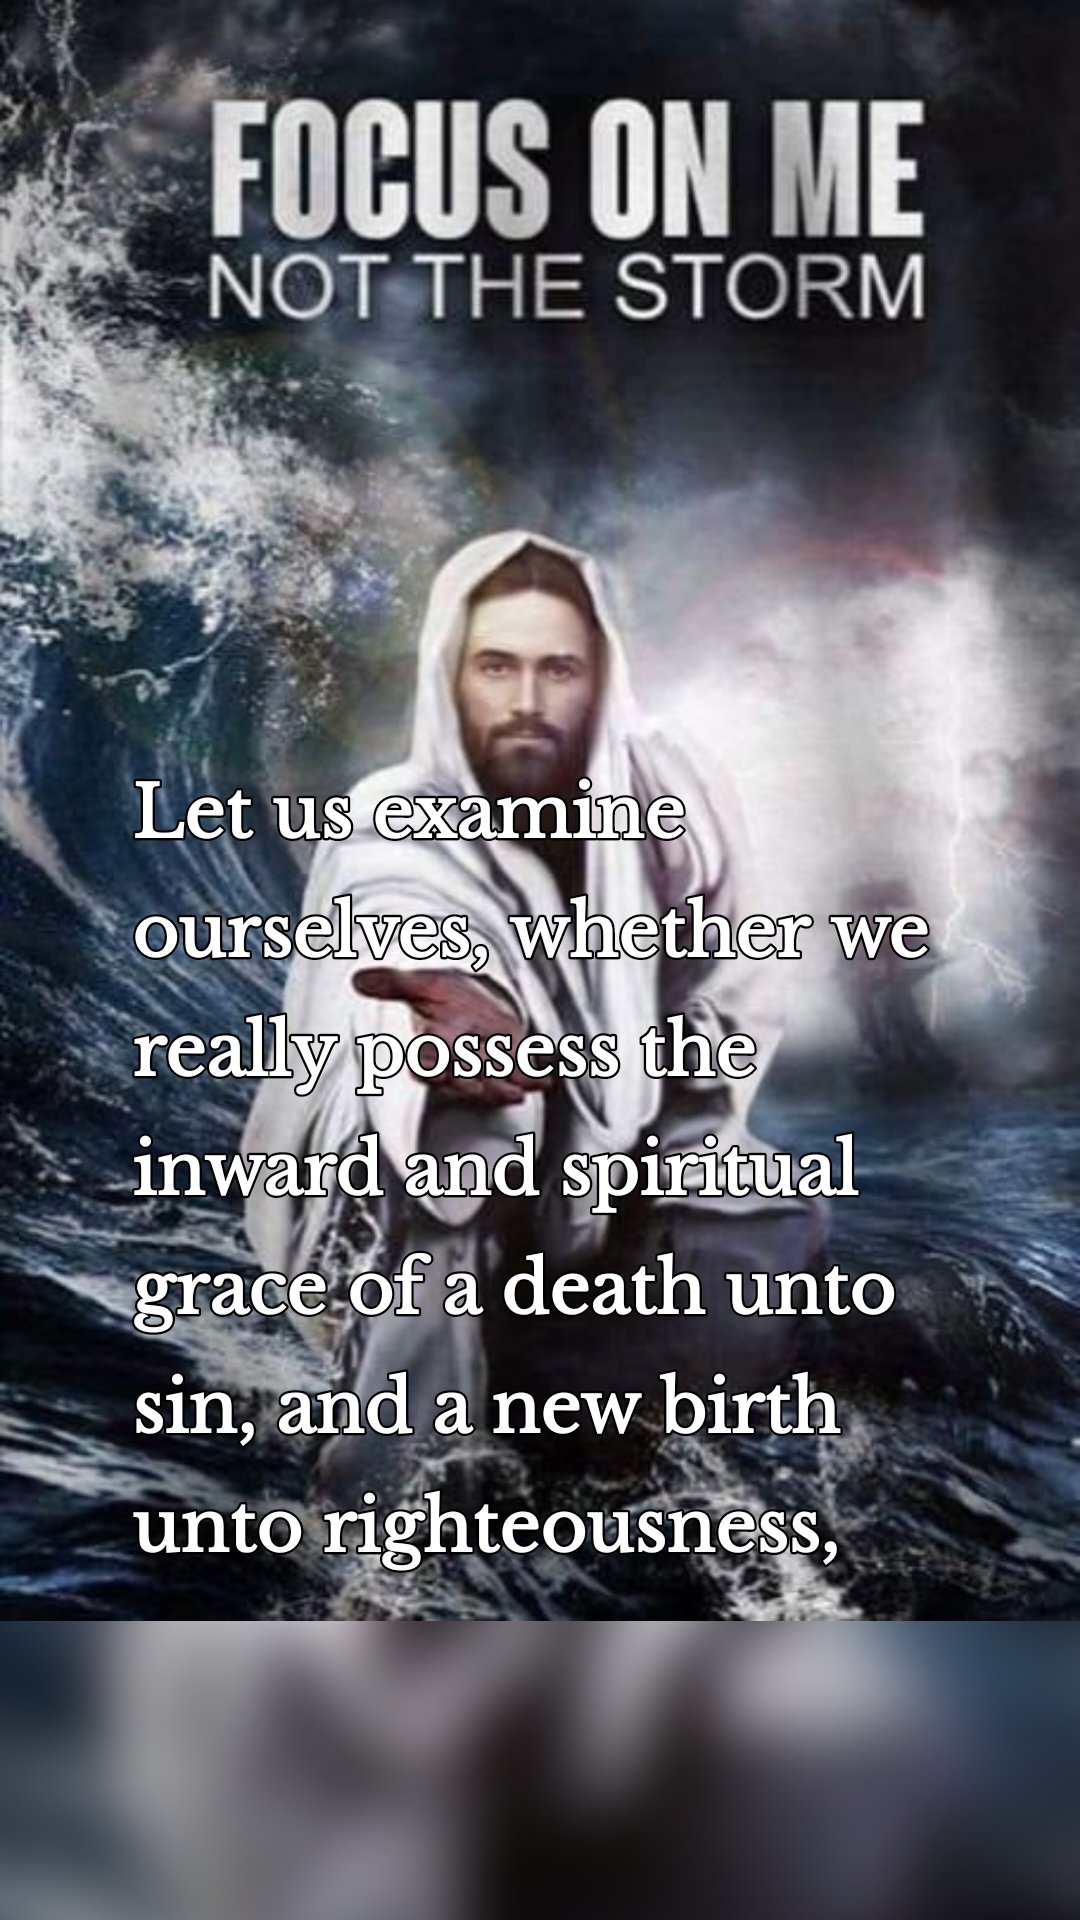 Let us examine ourselves, whether we really possess the inward and spiritual grace of a death unto sin, and a new birth unto righteousness,